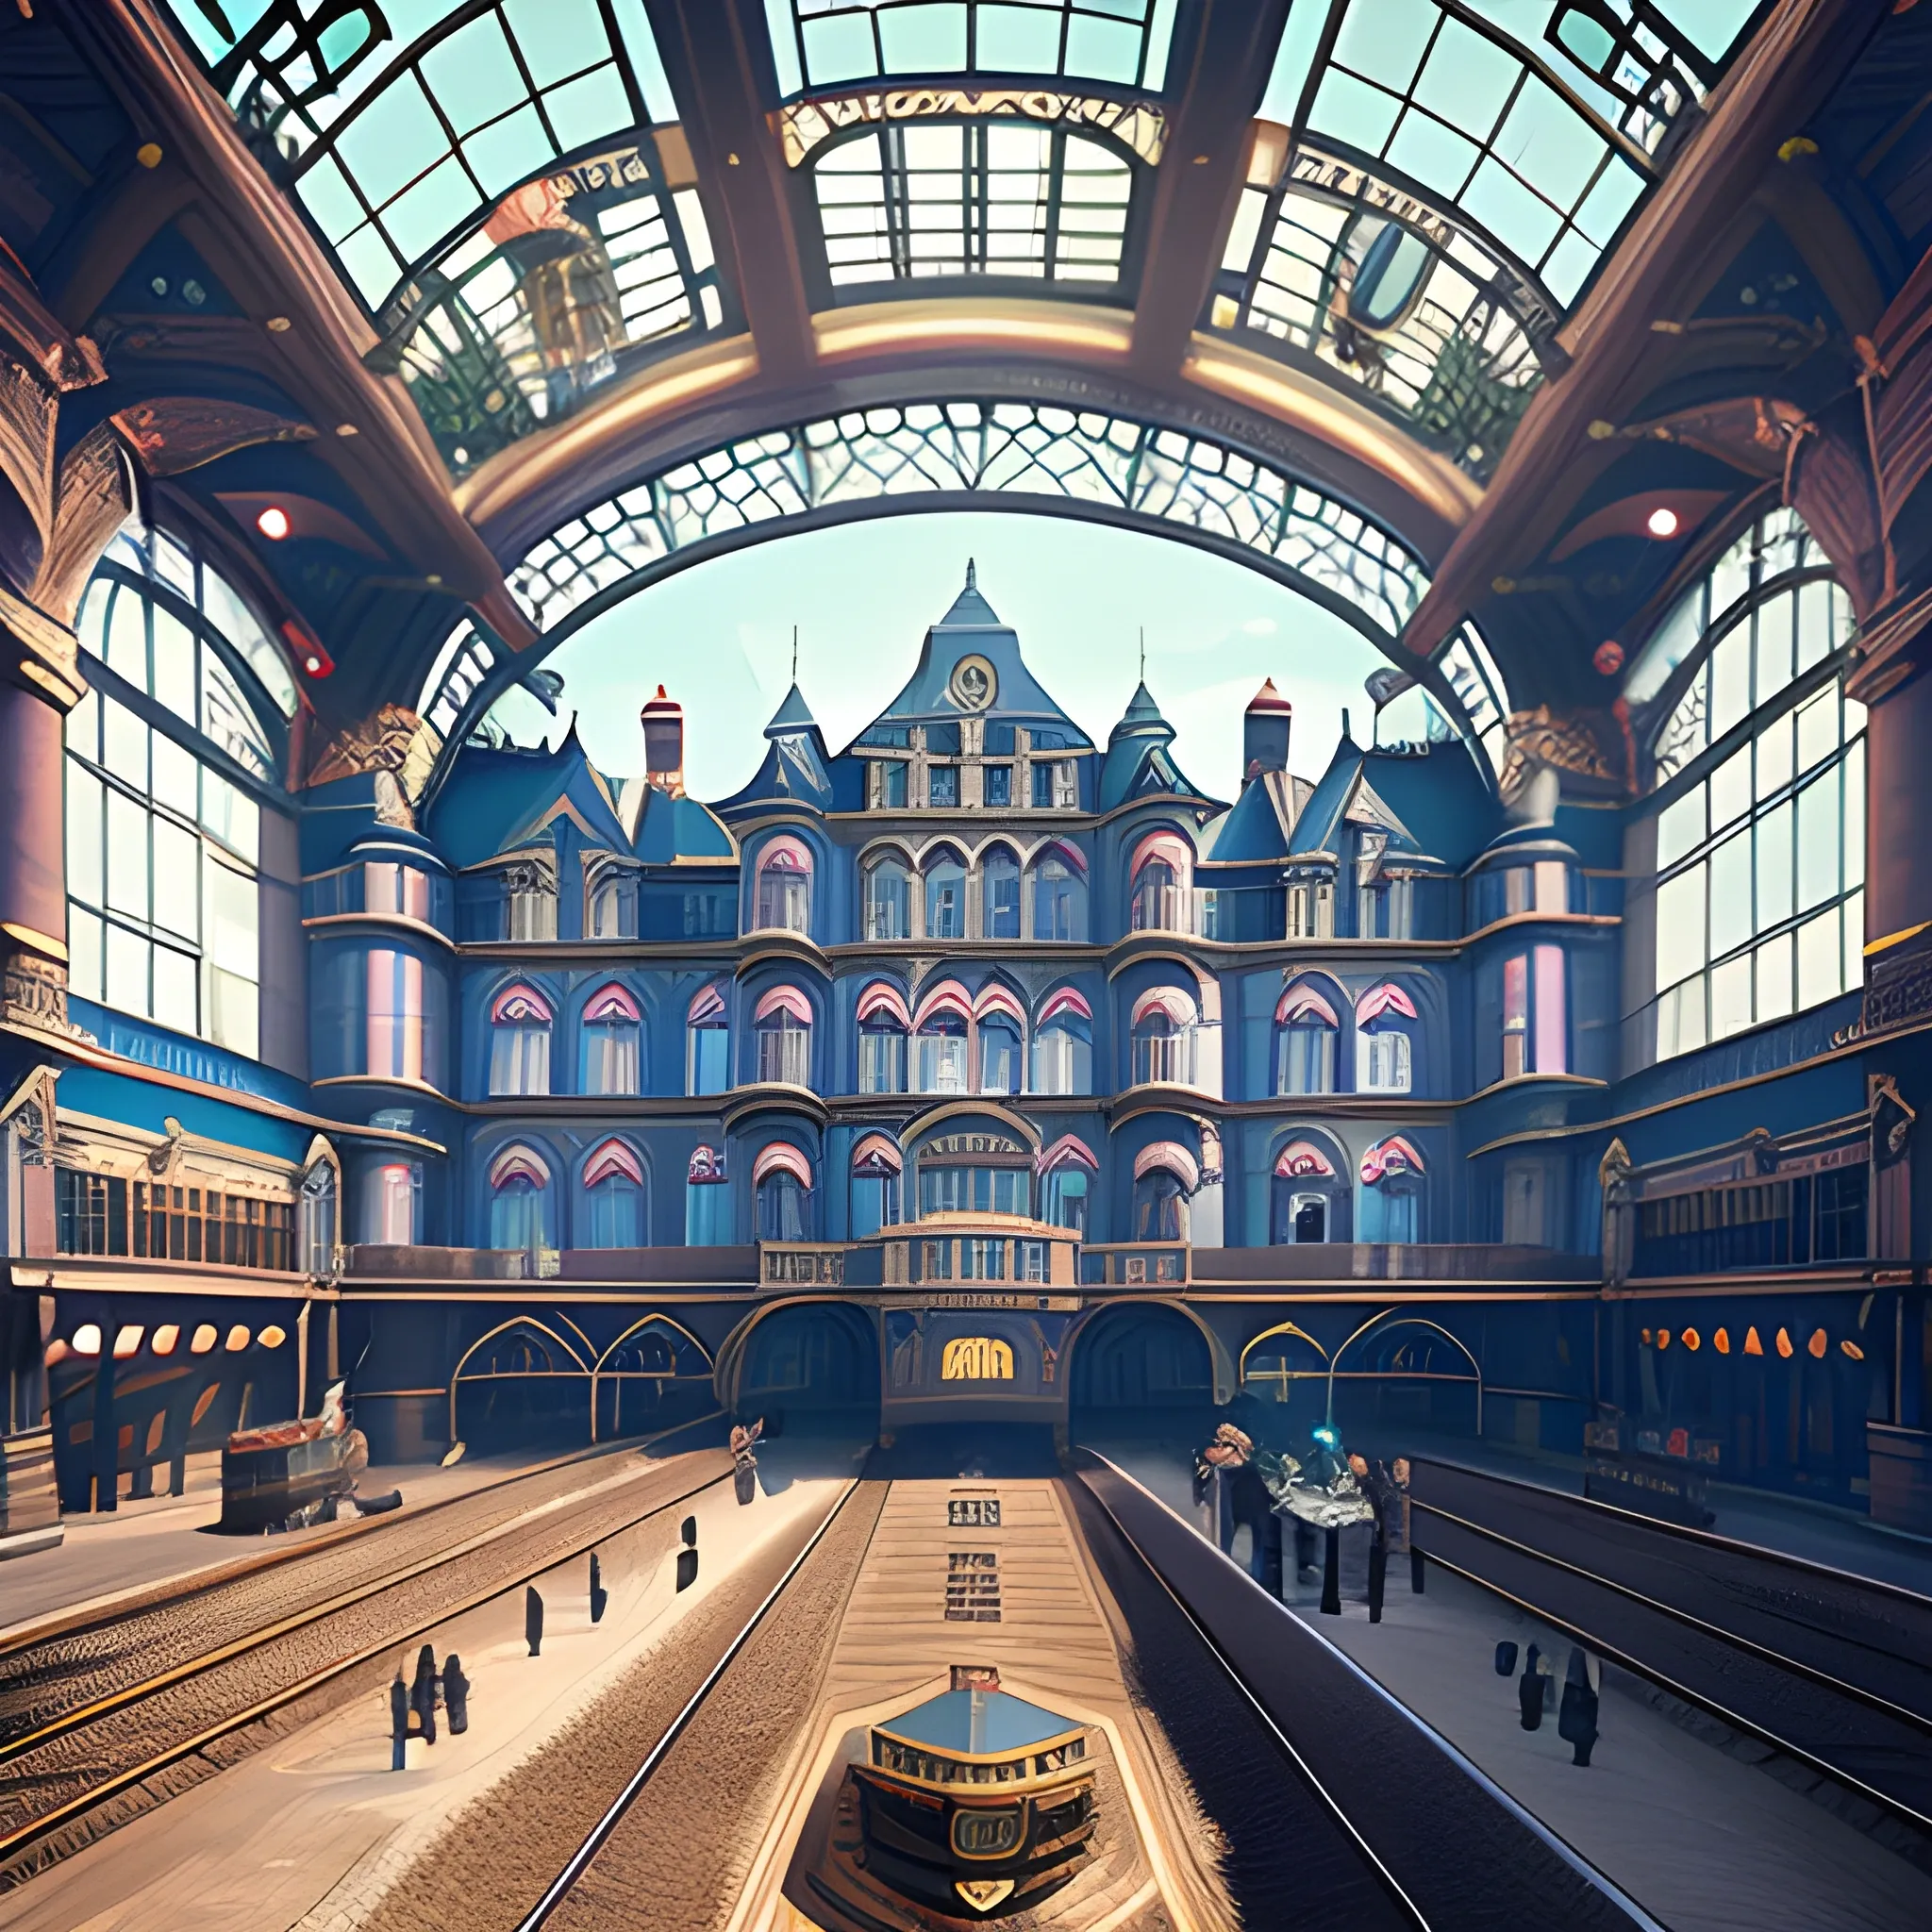 masterpiece, steampunk central train station, in the style of th ...